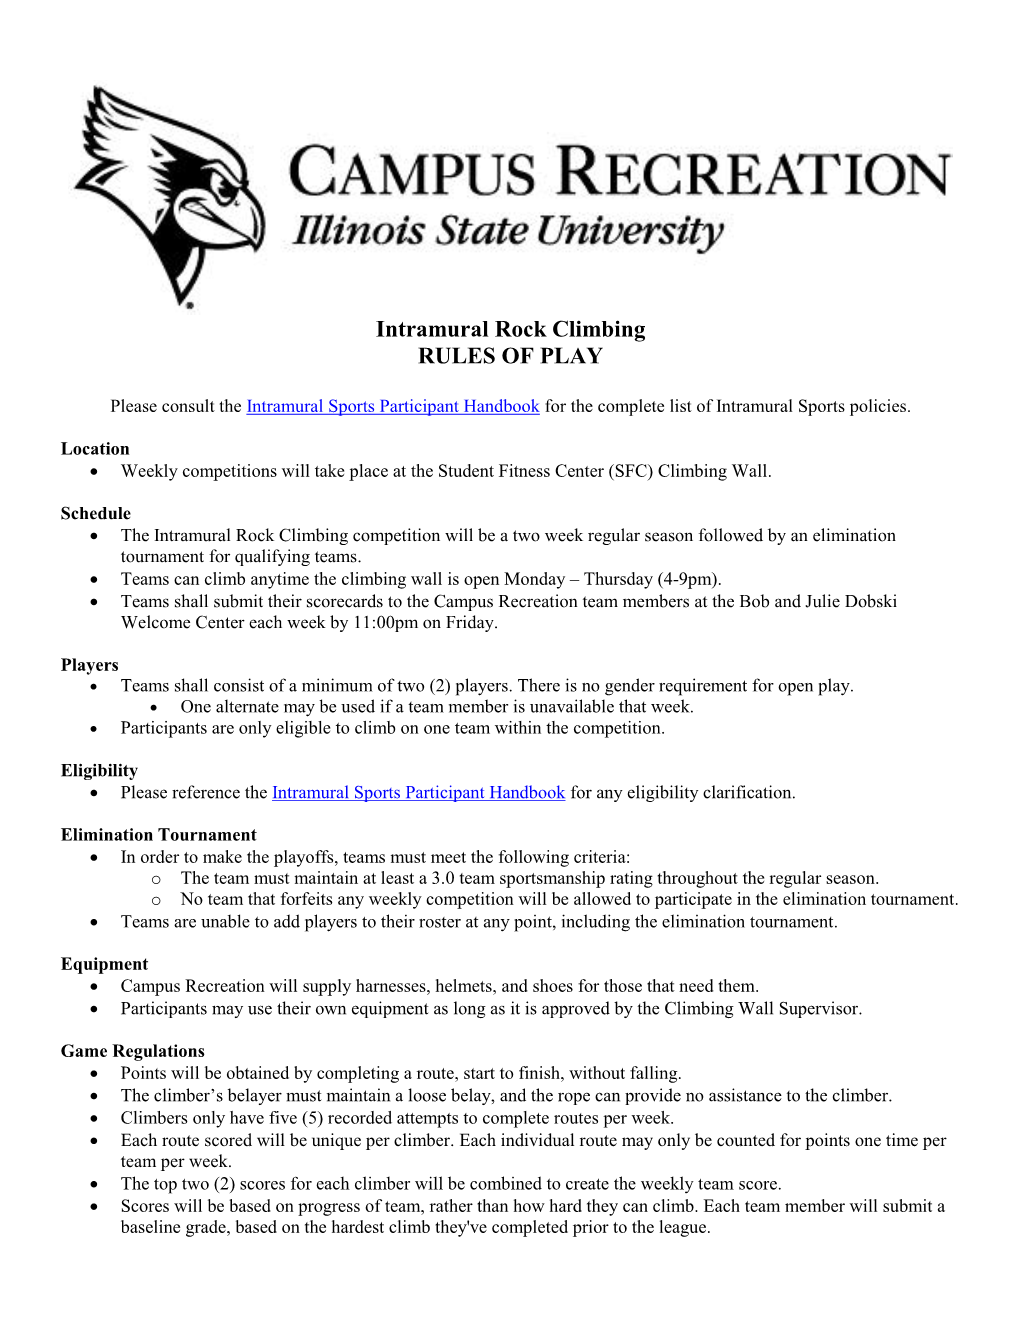 Intramural Rock Climbing RULES of PLAY